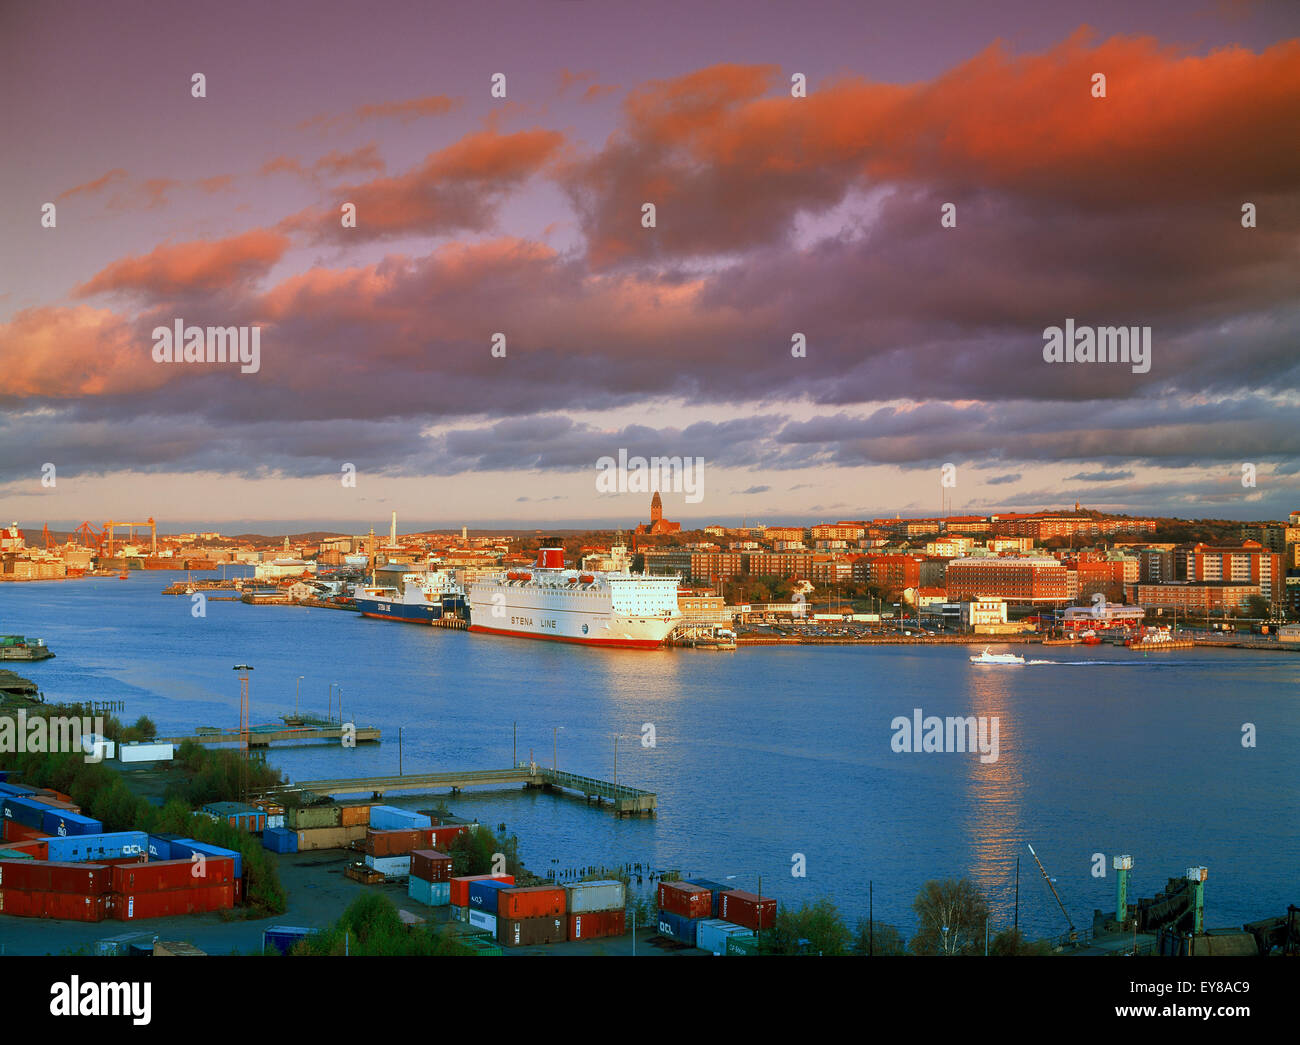 Ships in port at Gothhenburg or Goteborg on Sweden's West Coast in sunset light Stock Photo